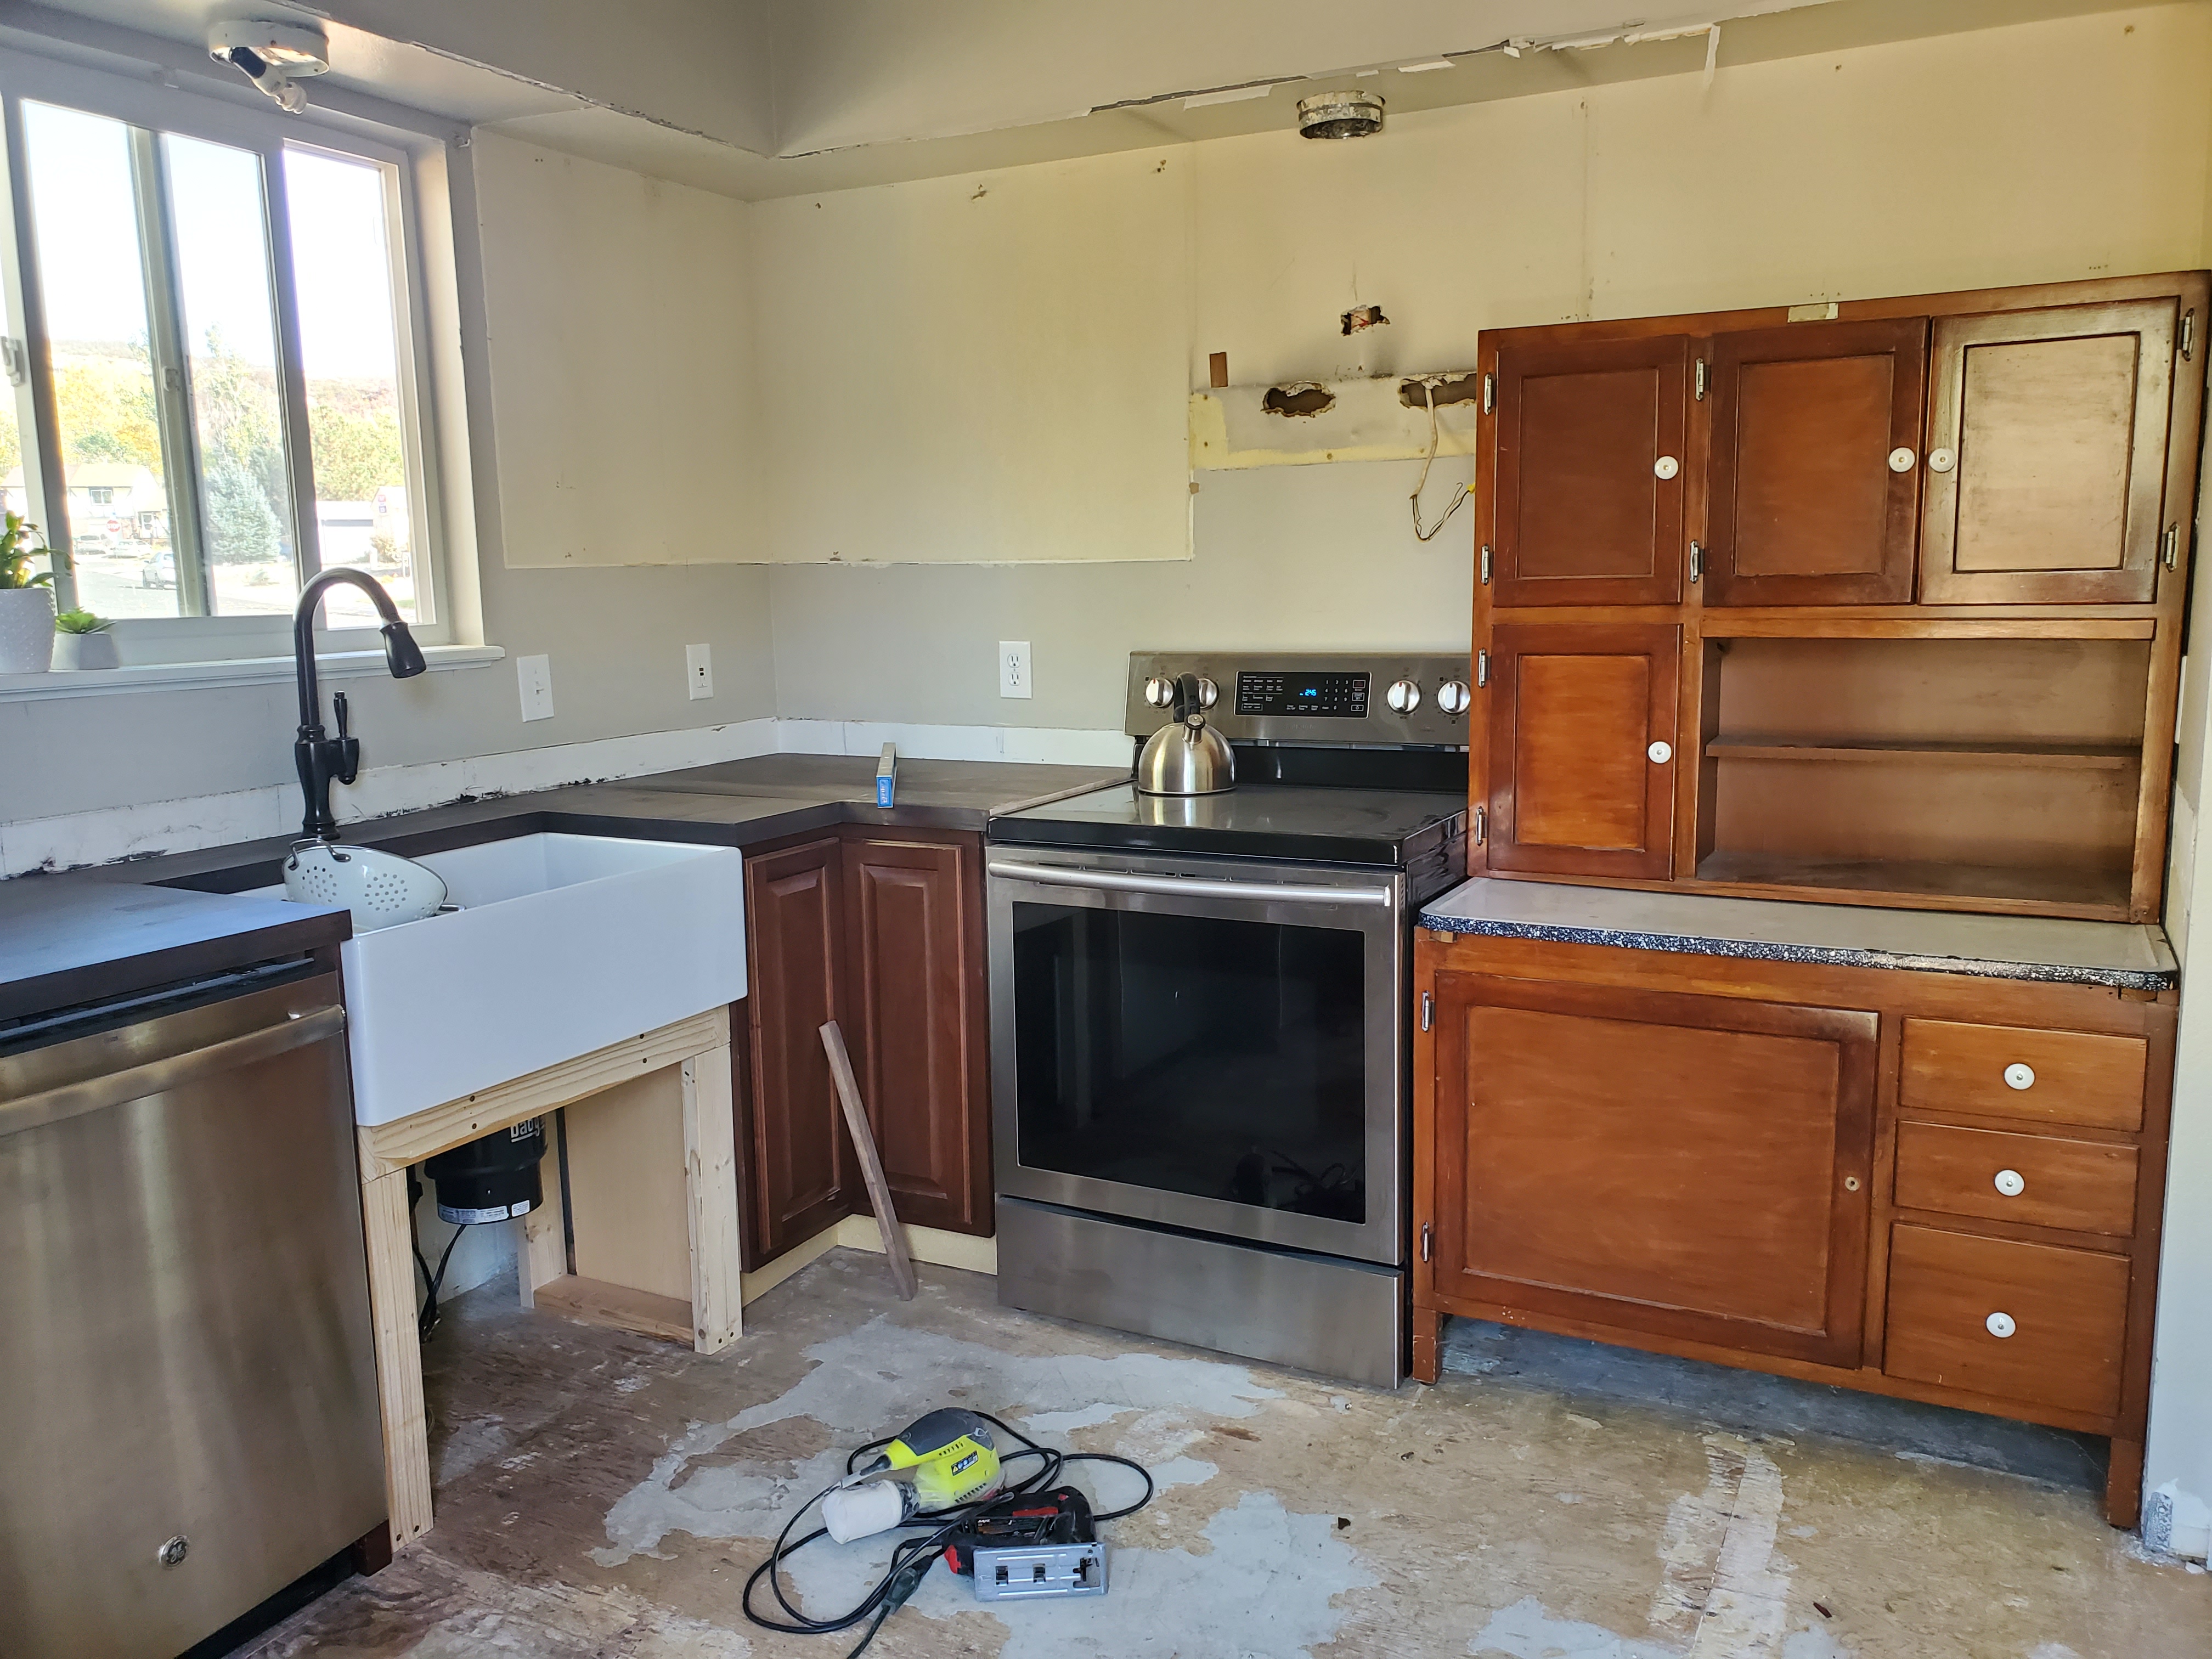 hutch to kitchen cabinets